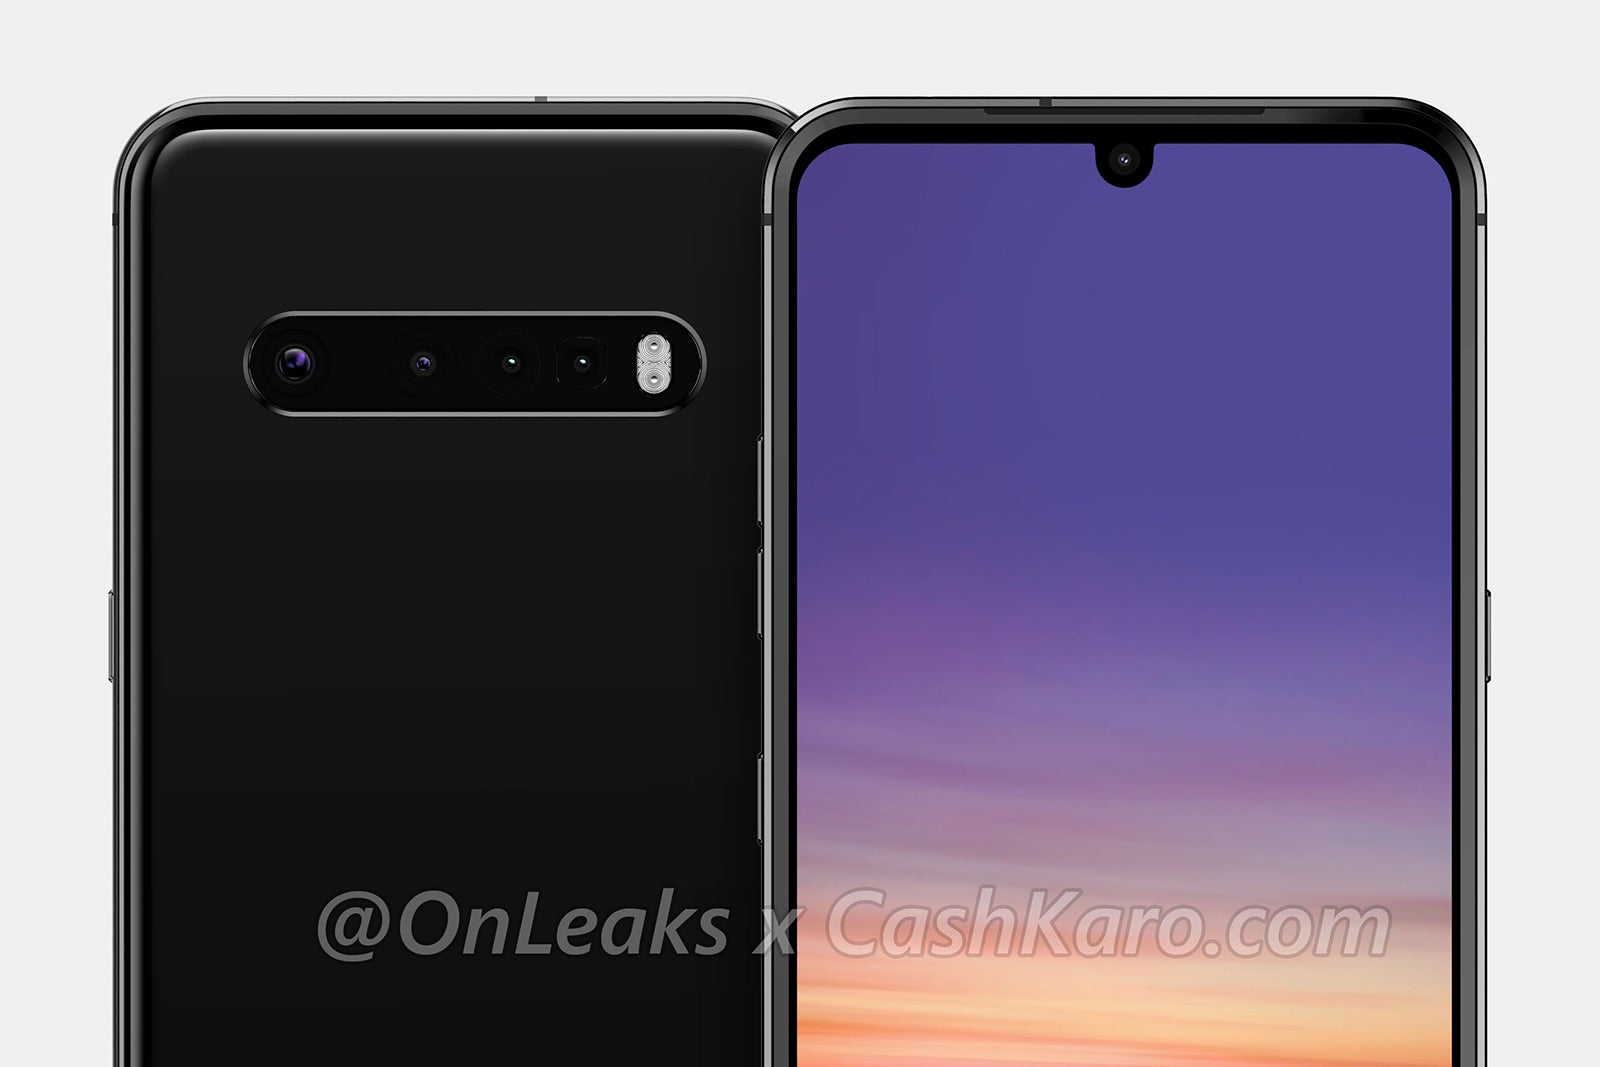 LG G9 ThinQ: Price, release date, news, and rumors